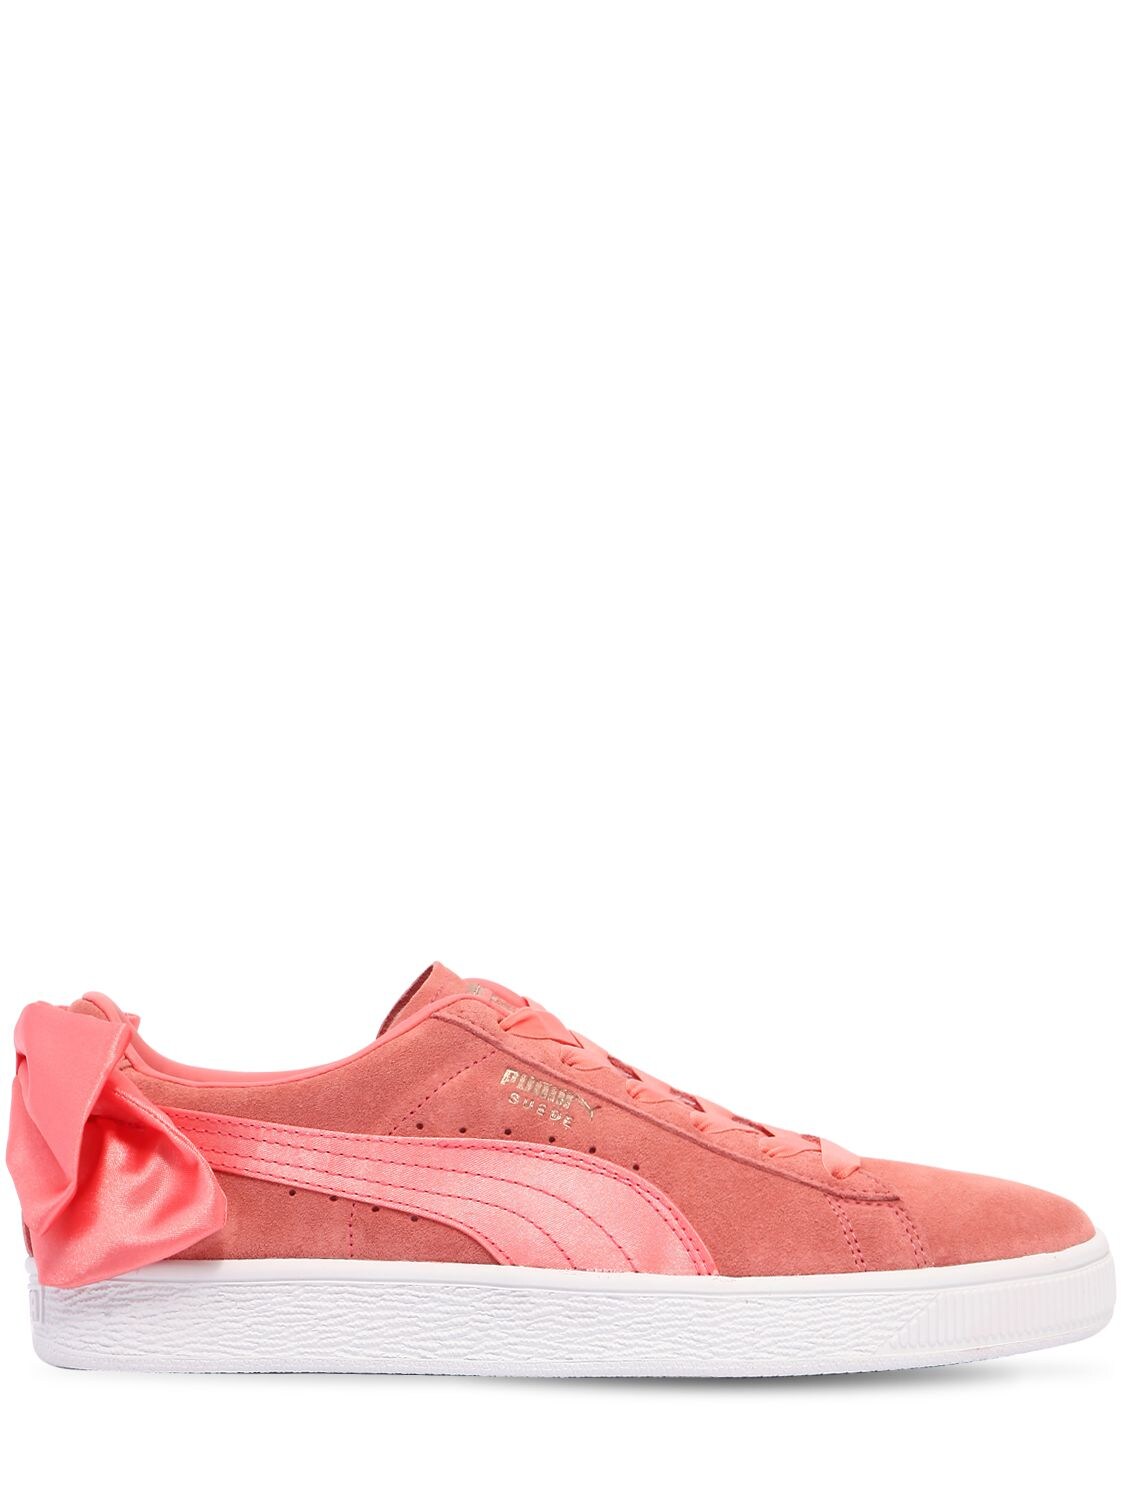 PUMA BOW SUEDE SNEAKERS,67IDM8009-MDE1